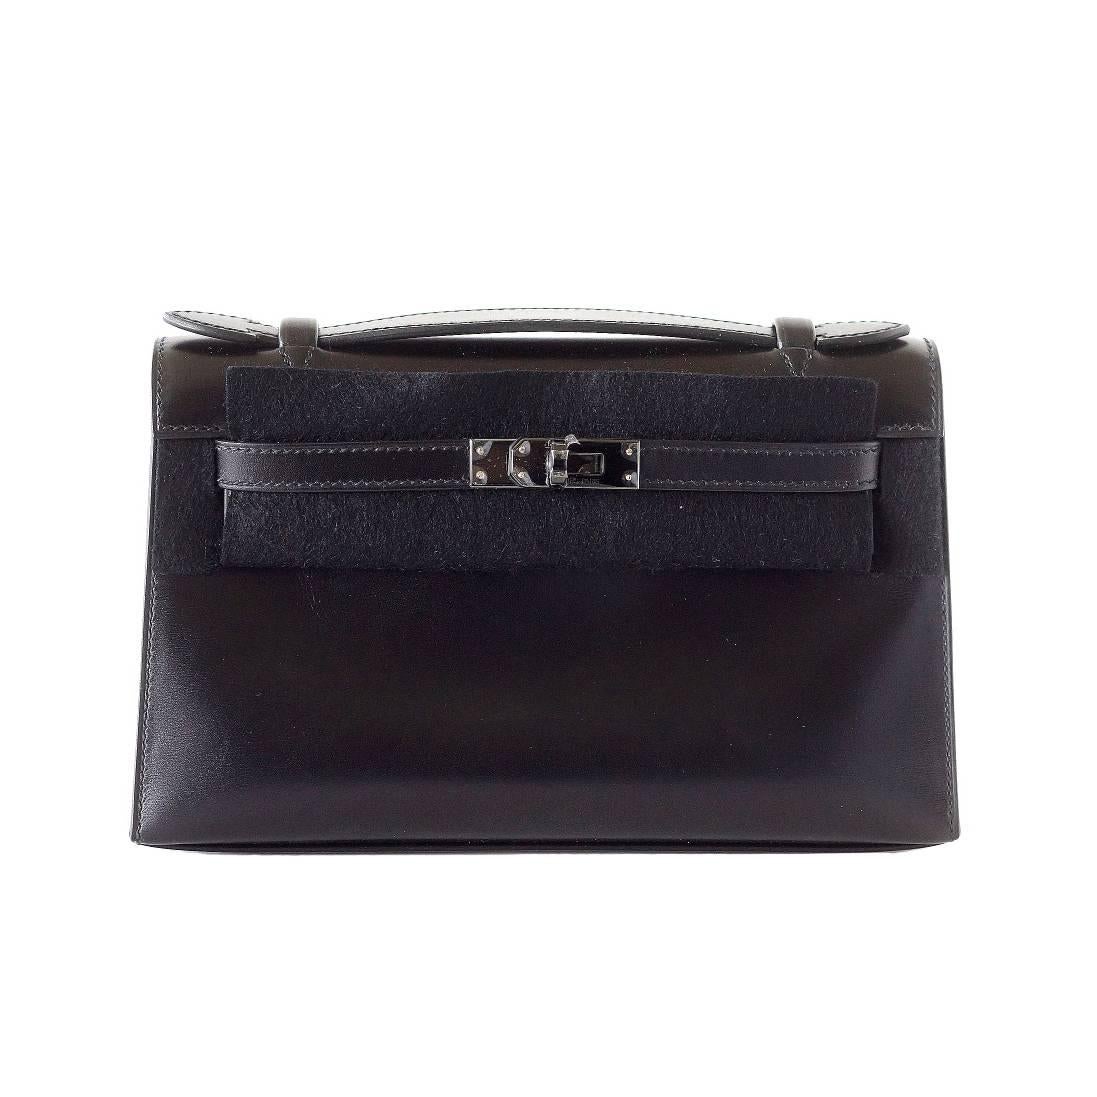 HERMES Kelly Pochette Limited Edition Very Rare SO BLACK Box Leather New